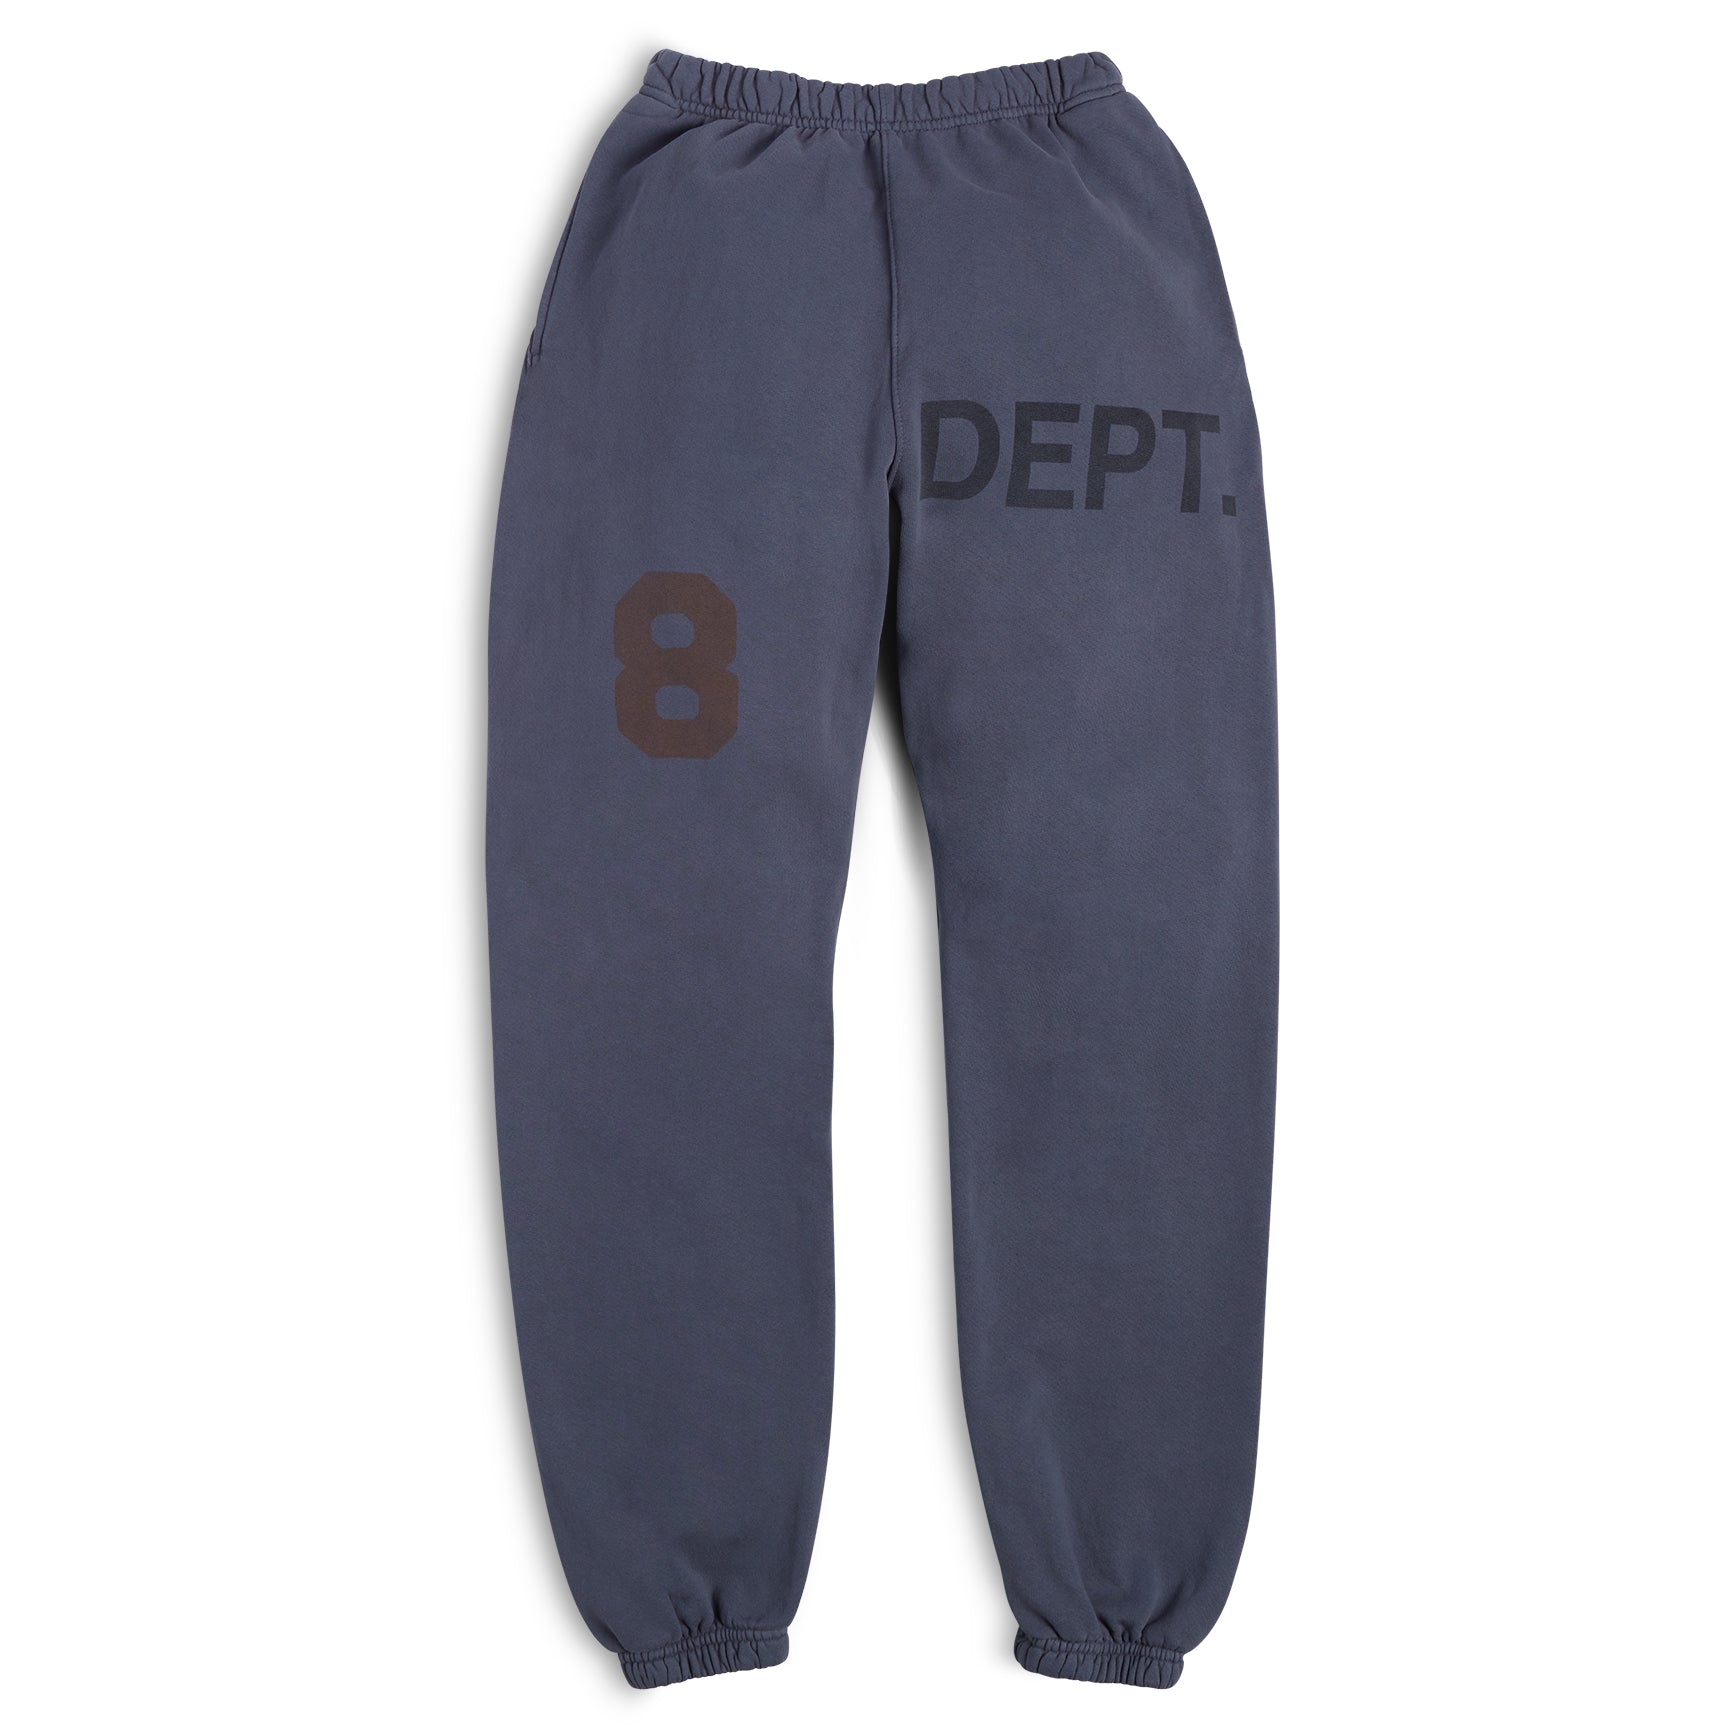 Gallery Dept Sweatpants Always In Stock! Multiple Styles And Sizes